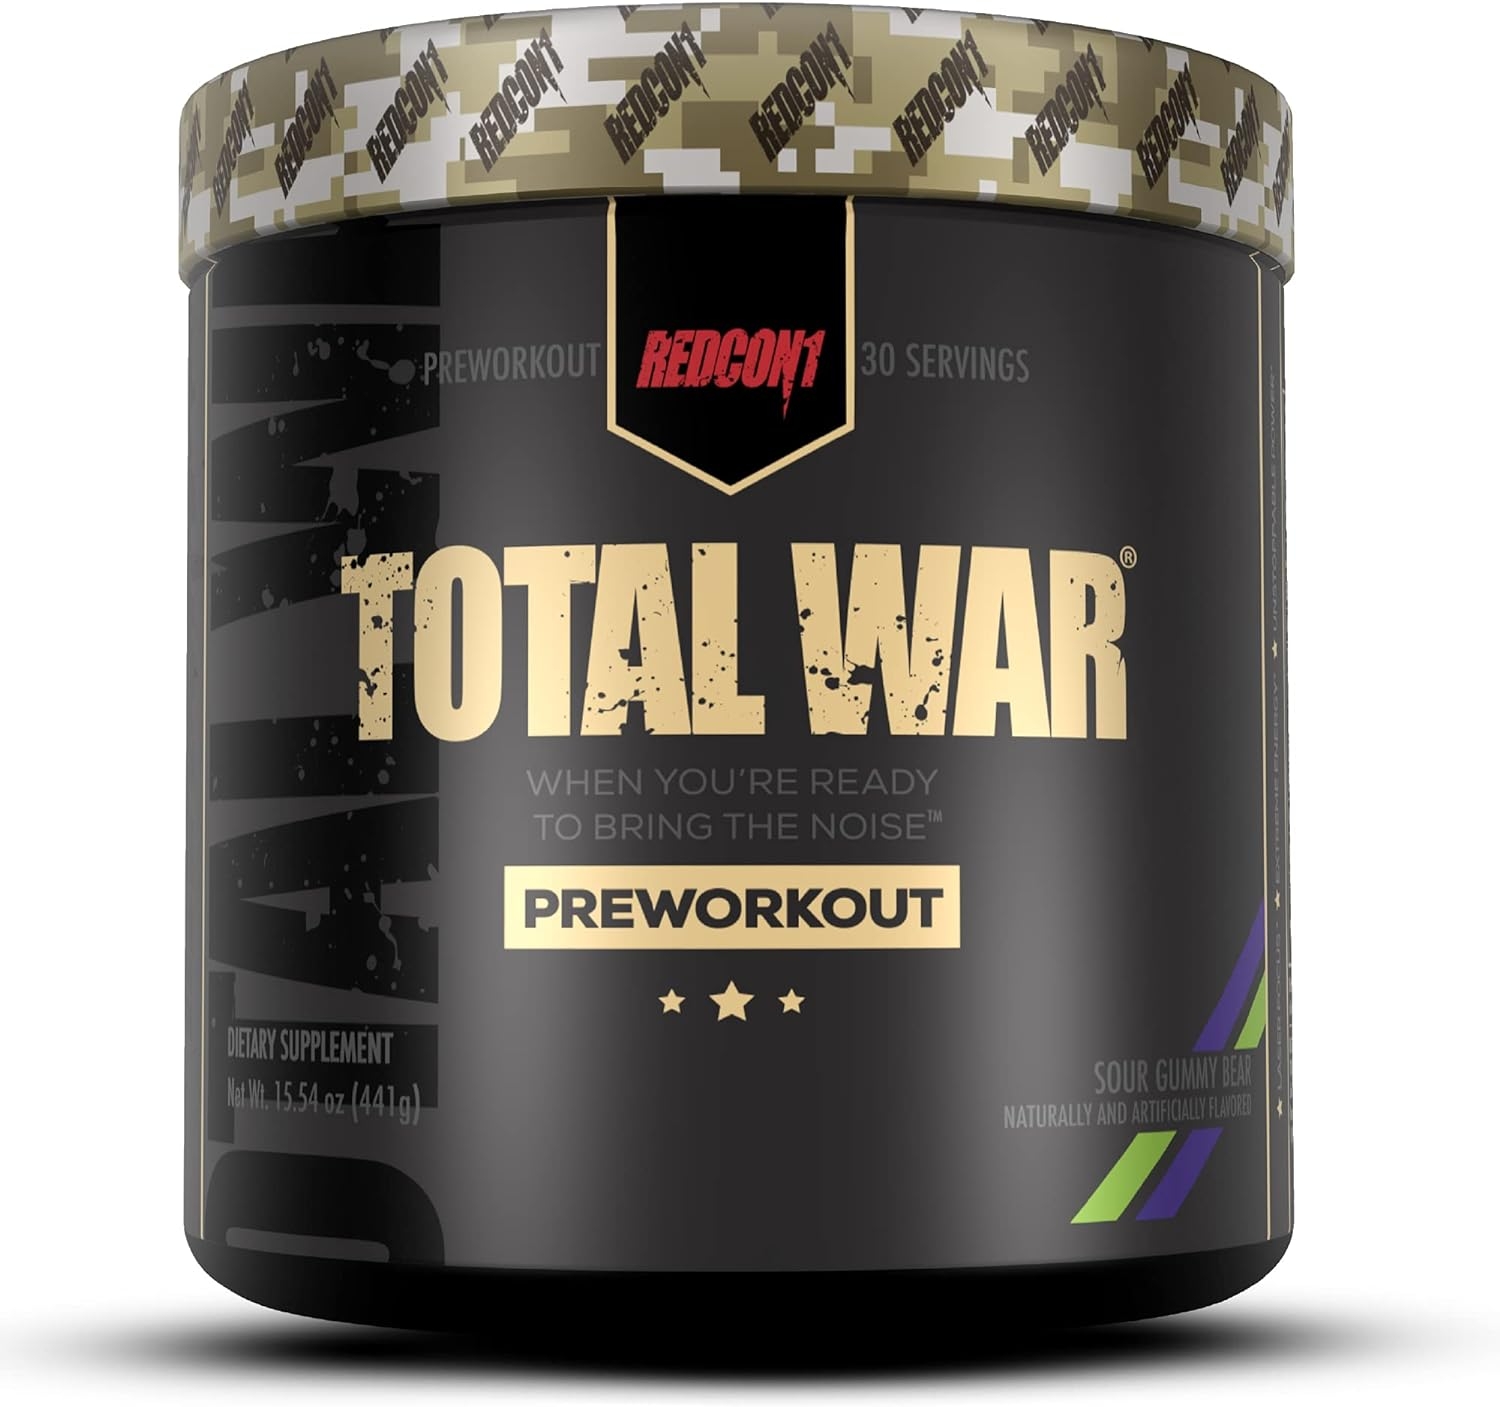 Redcon1 Total War PreWorkout Powder, 30 Servings, (Sour Gummy) Boost Energy, Increase Endurance and Focus, Beta-Alanine, 350mg Caffeine, Citrulline Malate, Nitric Oxide Booster - Keto Friendly